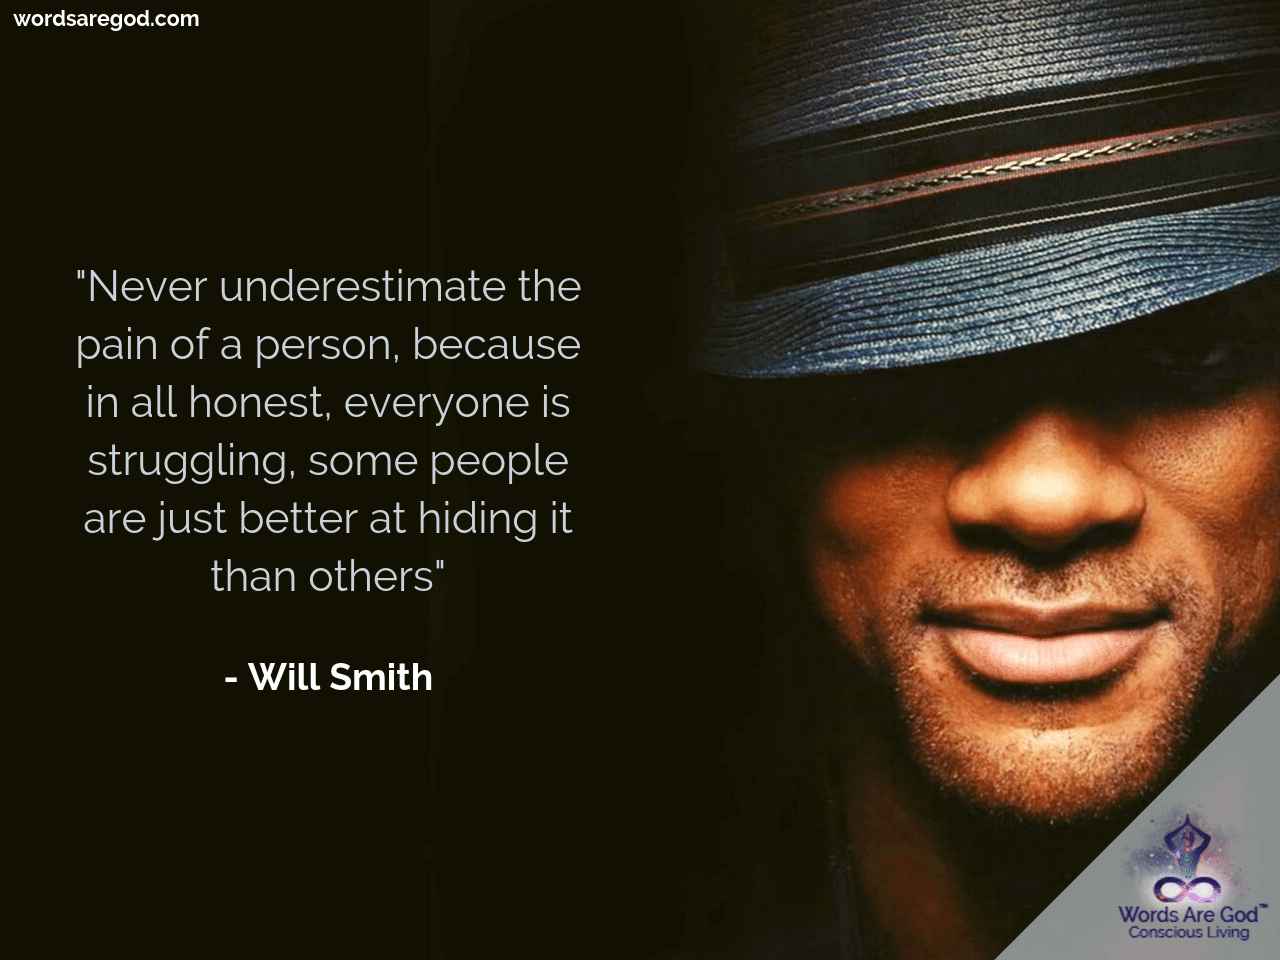 Will Smith Best Quote by Will Smith